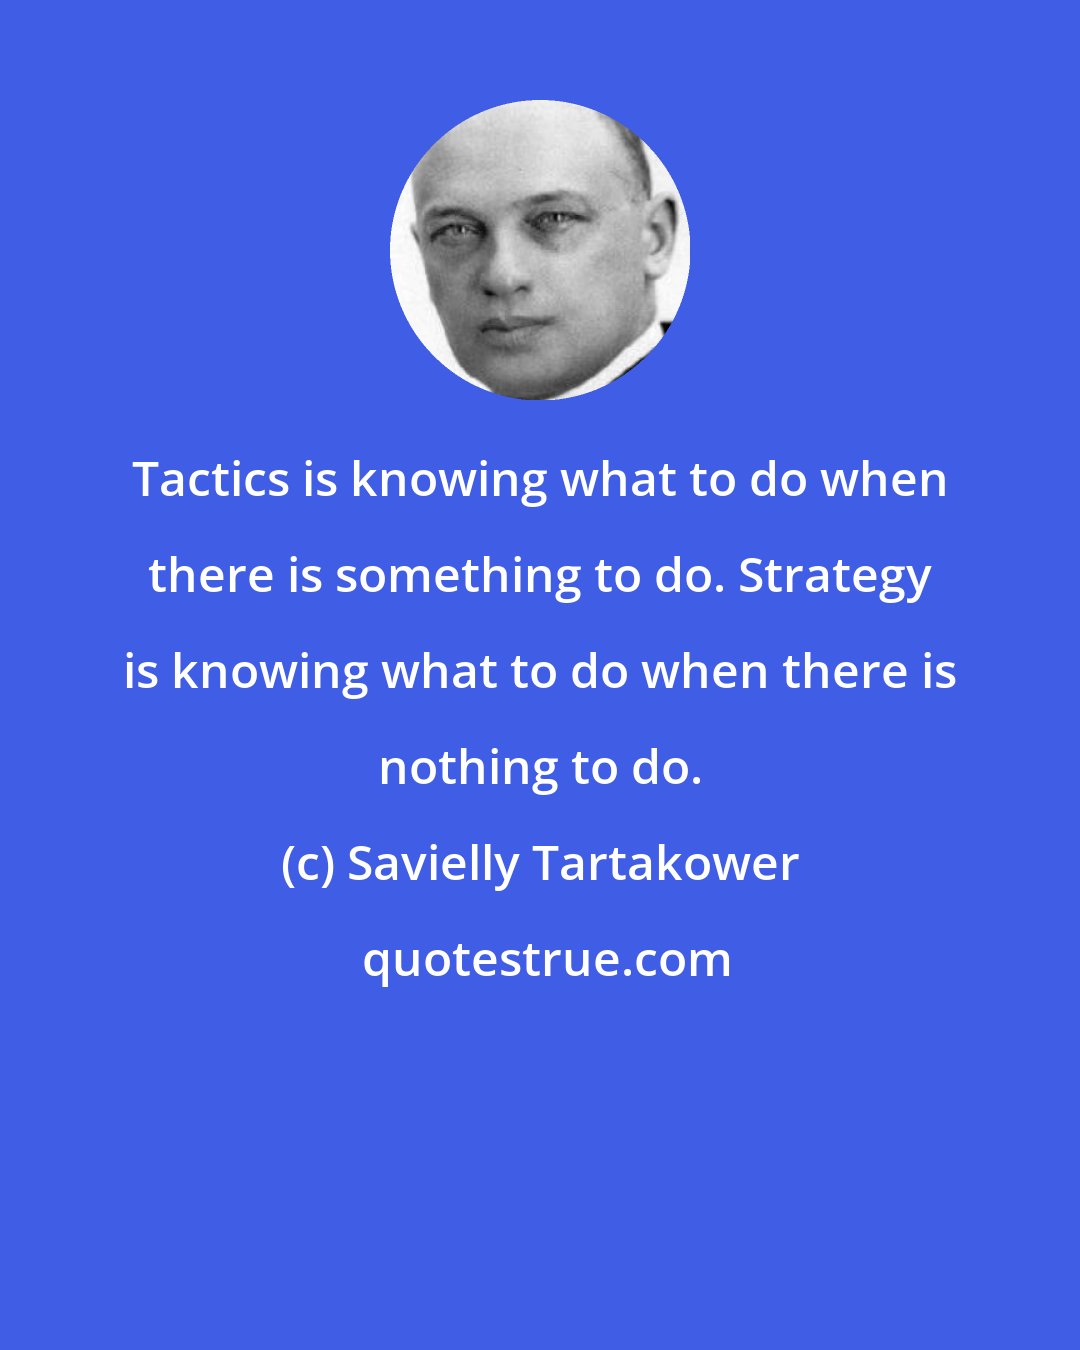 Savielly Tartakower: Tactics is knowing what to do when there is something to do. Strategy is knowing what to do when there is nothing to do.